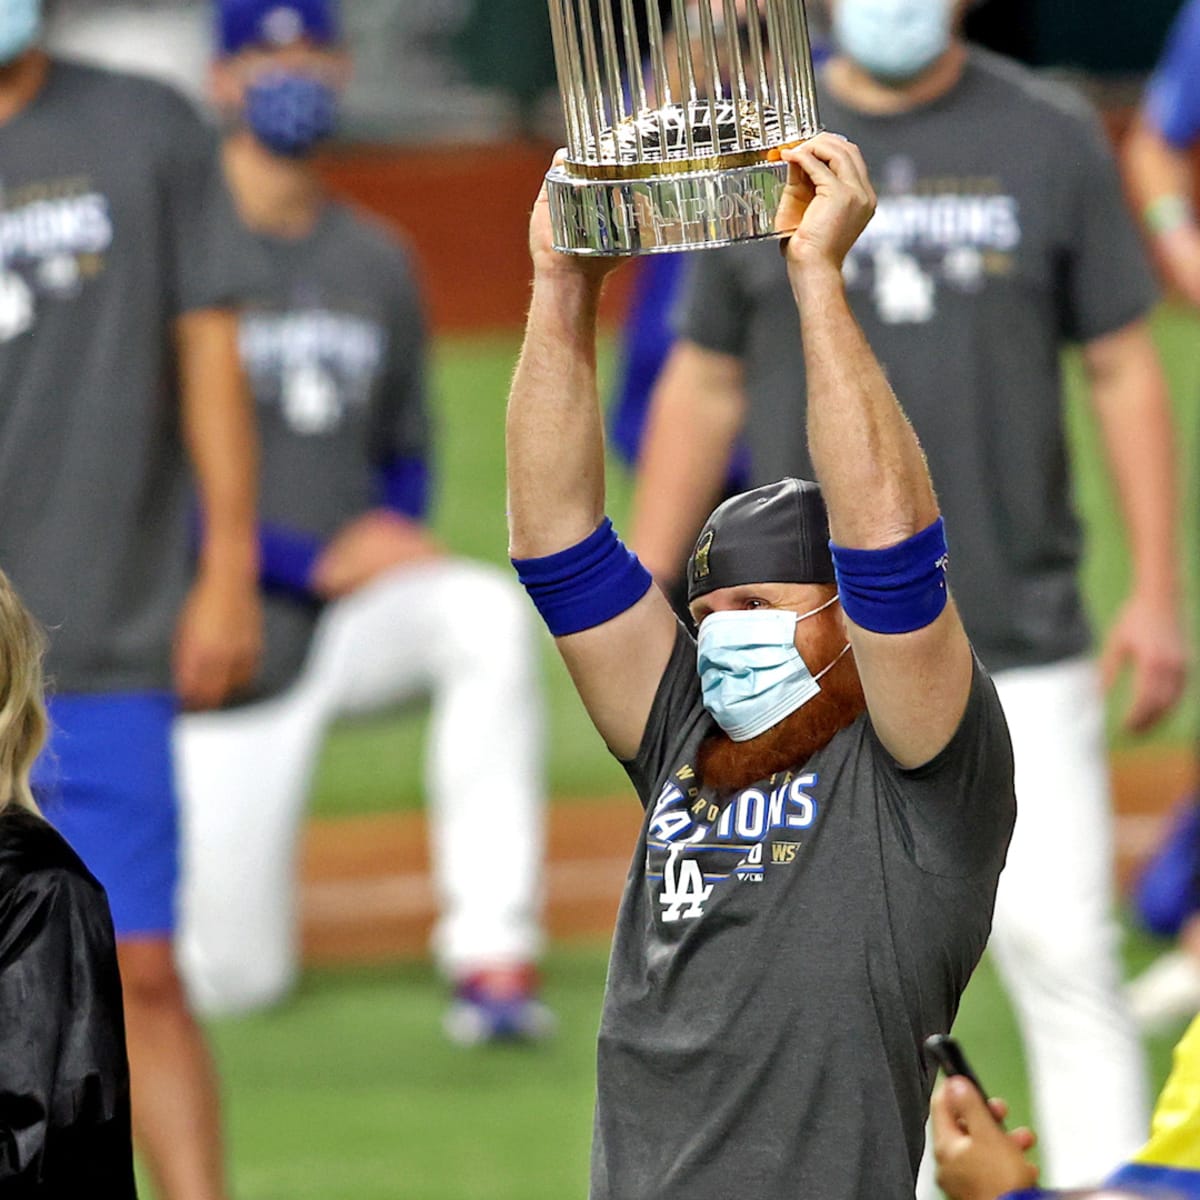 Dodgers World Series championship parade: Celebration plans TBD due to  COVID-19 - Sports Illustrated